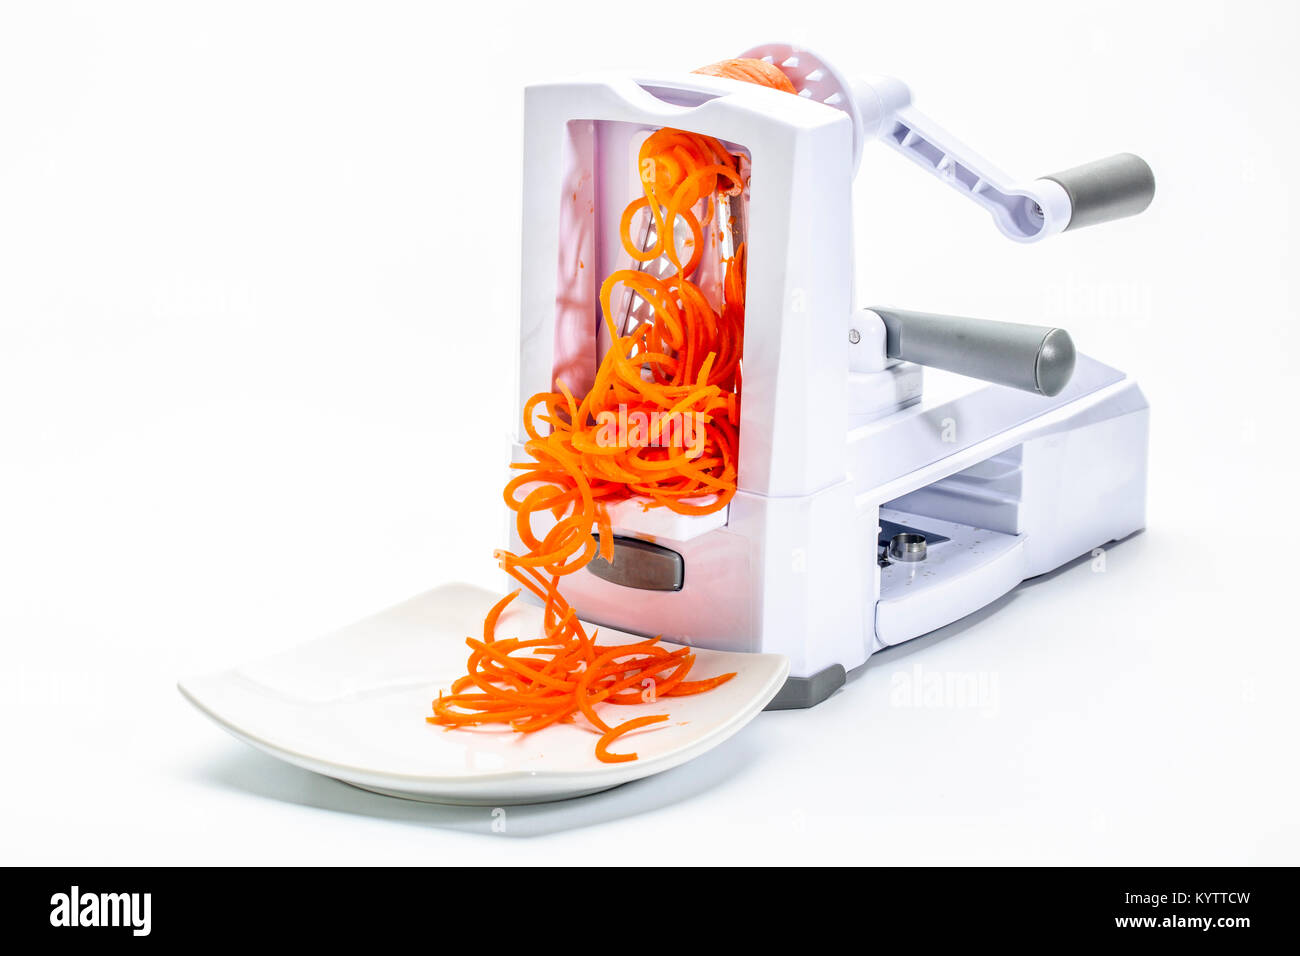 Spiralizer food Cut Out Stock Images & Pictures - Alamy